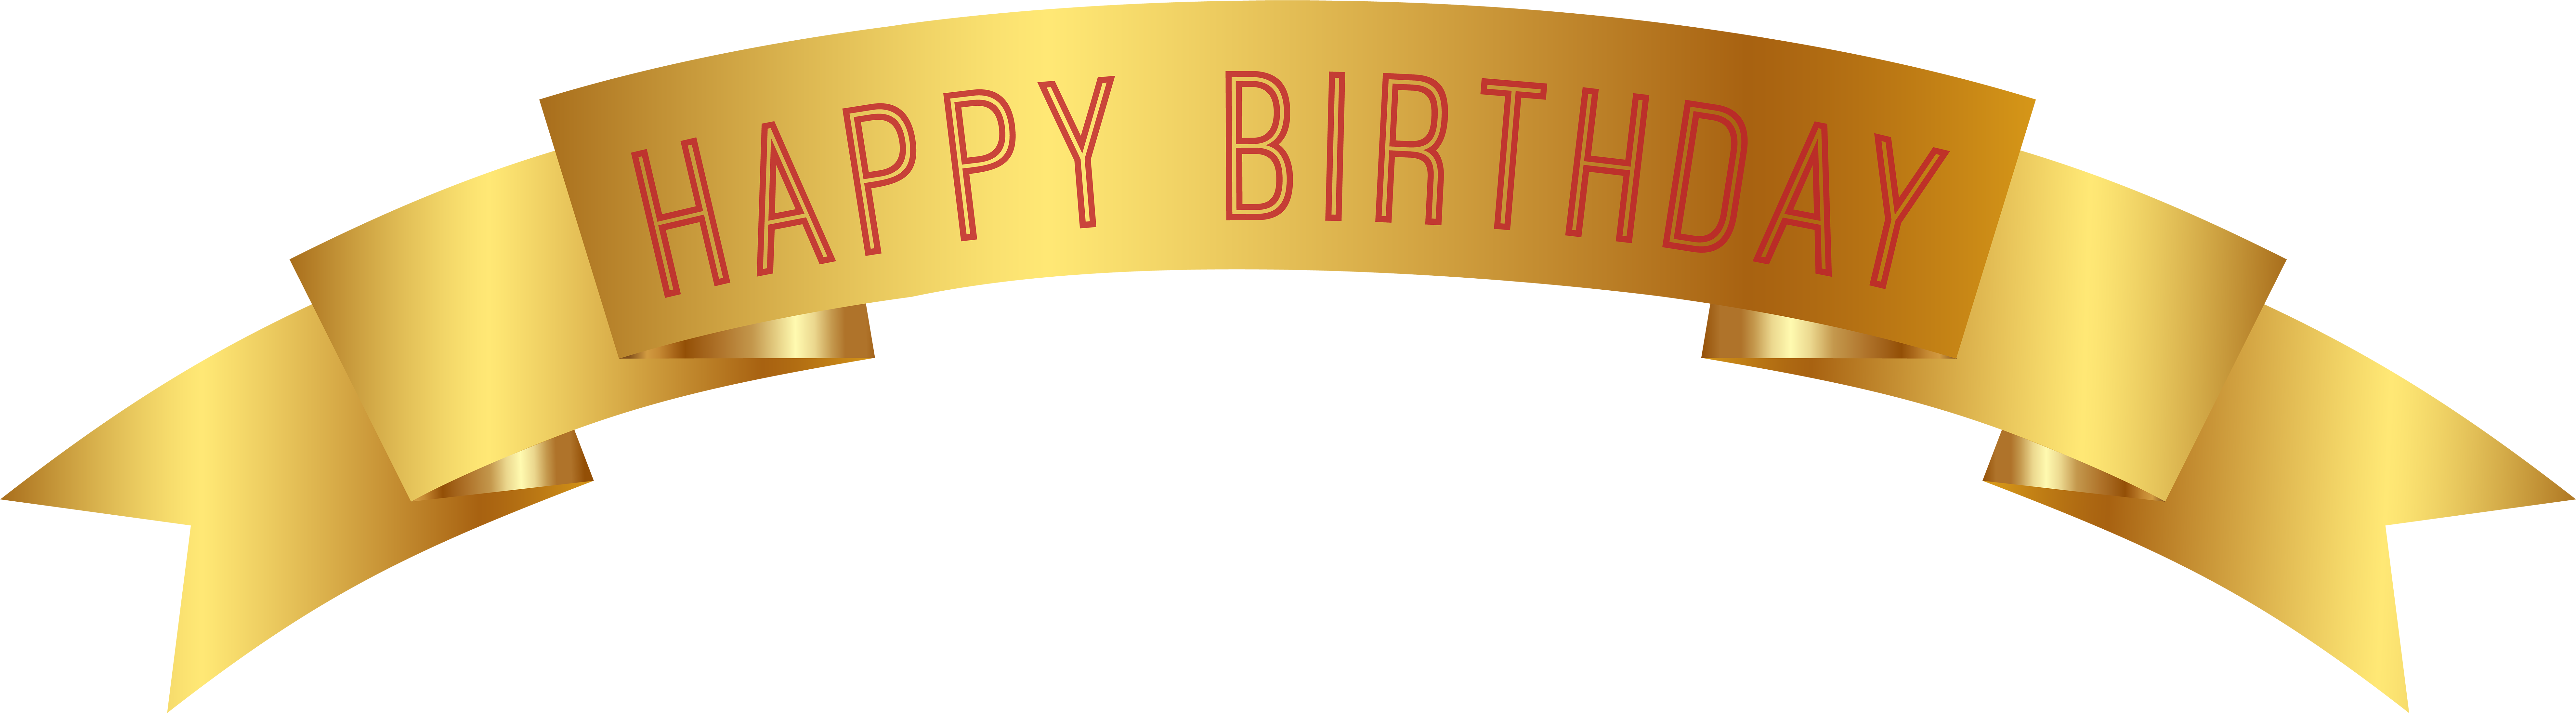 Free Happy Birthday Gold Png, Download Free Happy Birthday Gold Png png ...